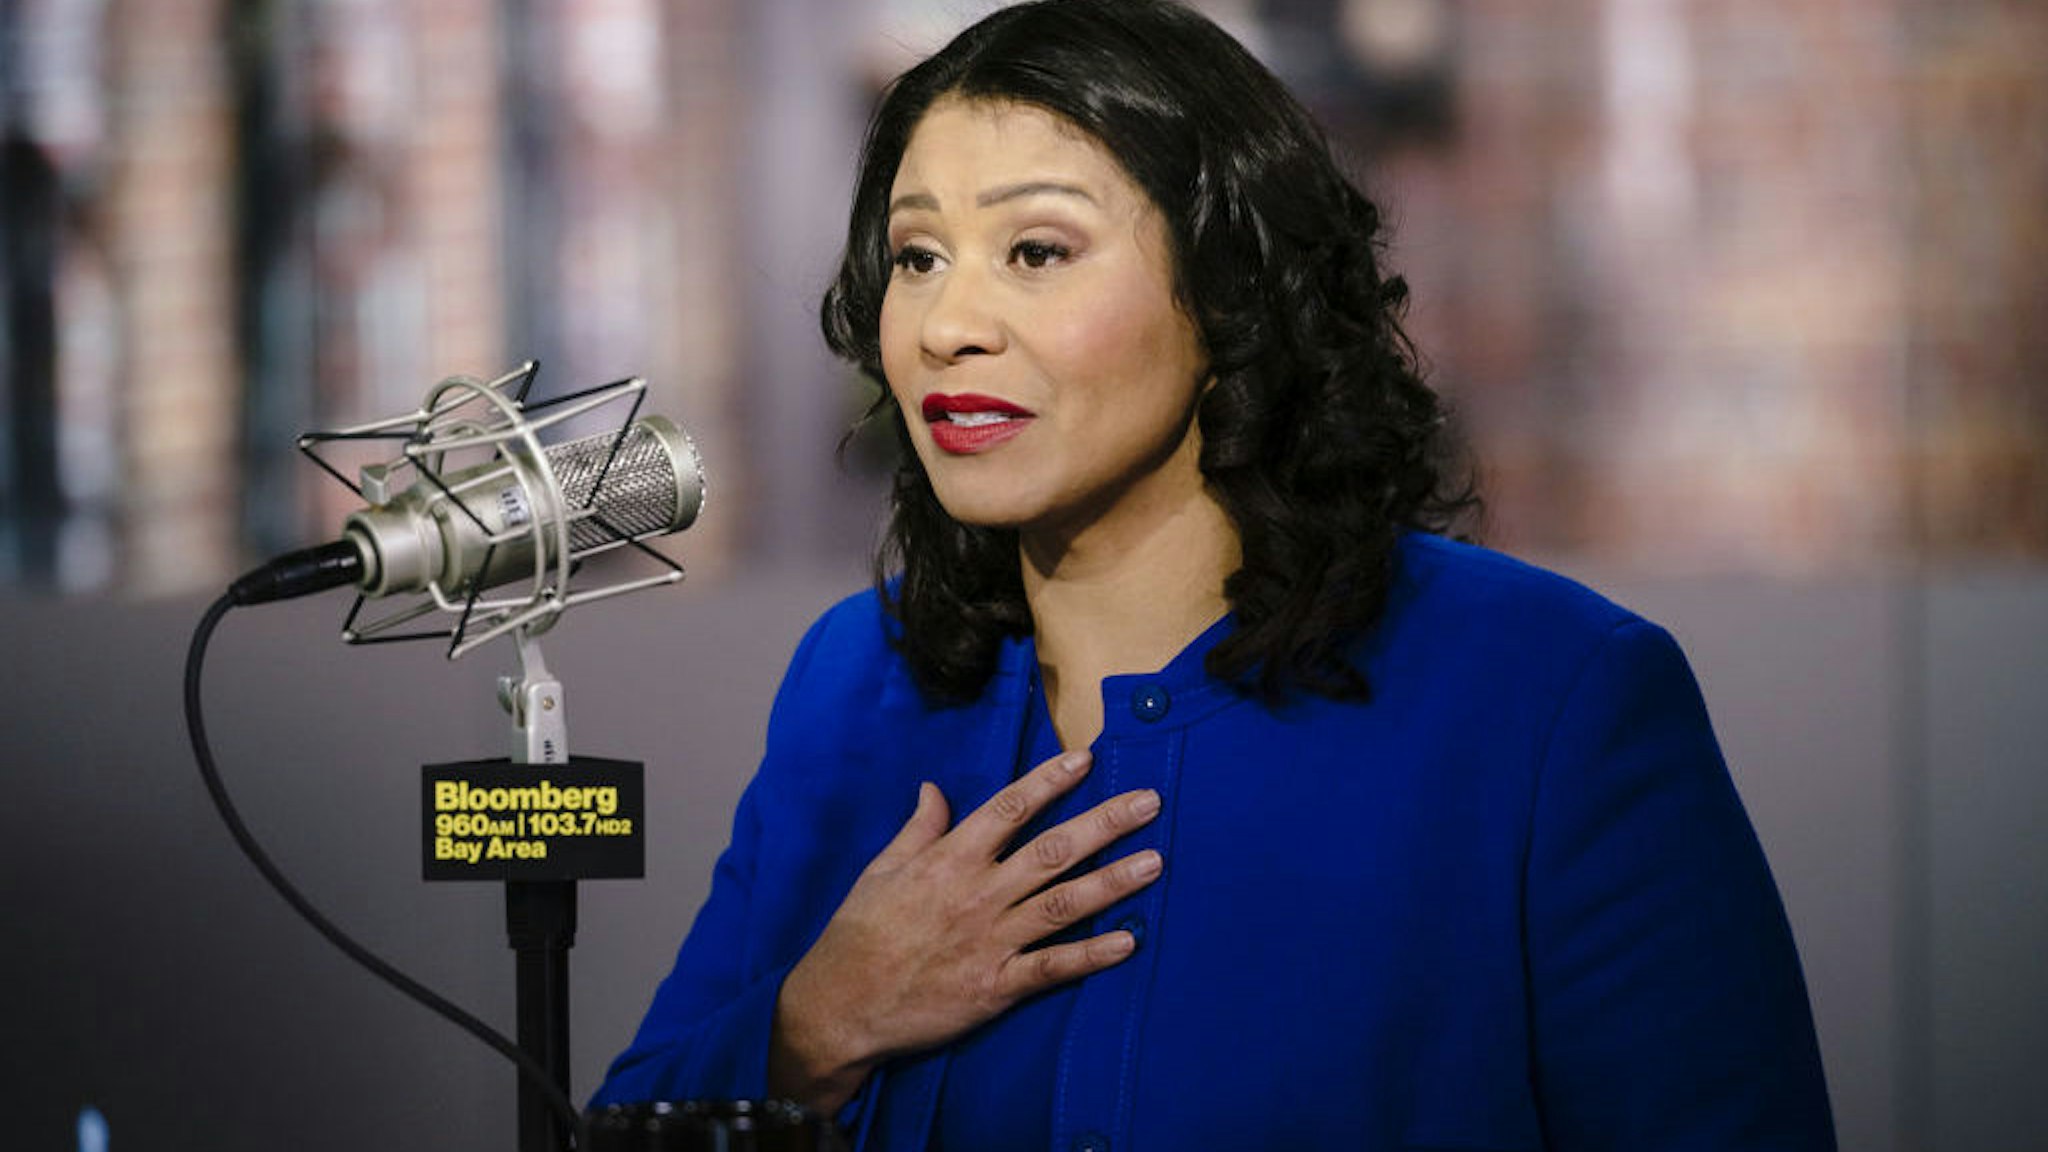 London Breed, mayor of San Francisco, speaks during a Bloomberg radio interview in San Francisco, California, U.S., on Tuesday, Feb. 5, 2020. Mike Bloomberg, the former mayor of New York, has earned the support of eight big-city mayors, including Breed. Photographer: Michael Short/Bloomberg